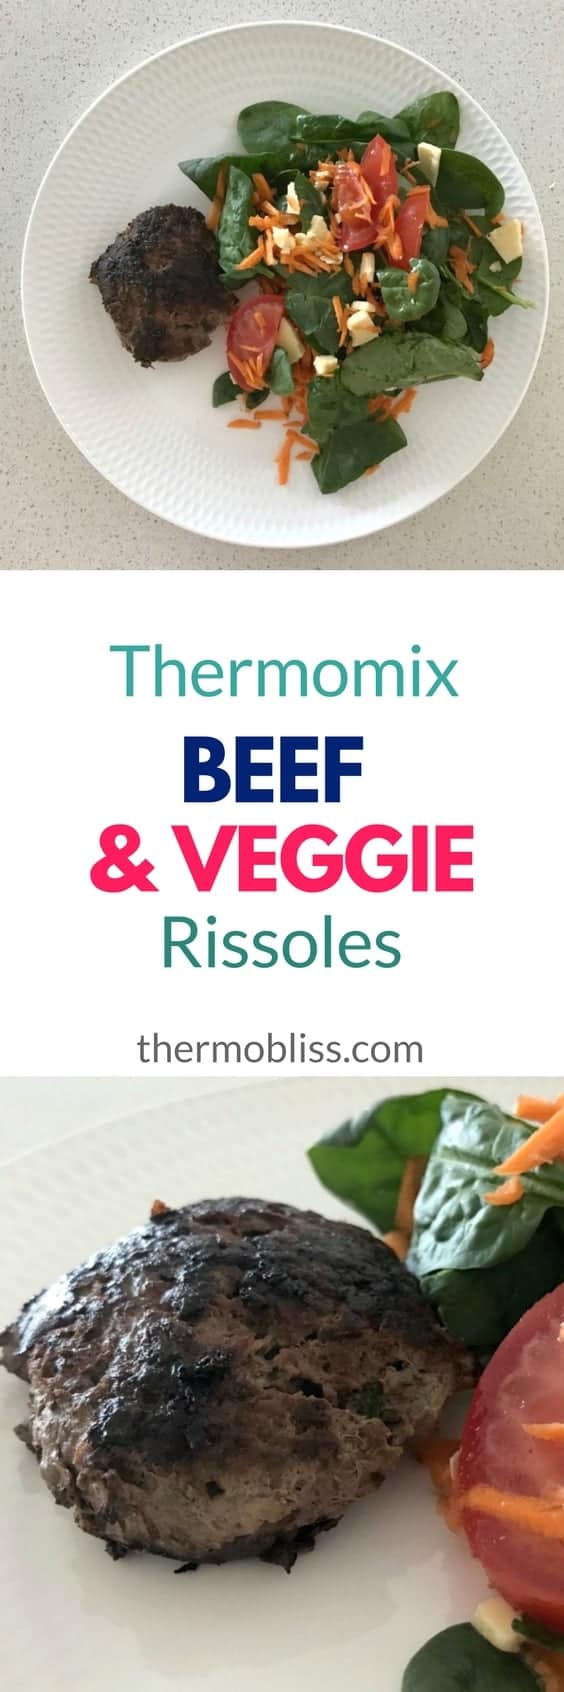 Thermomix Beef and Vegetable Rissoles